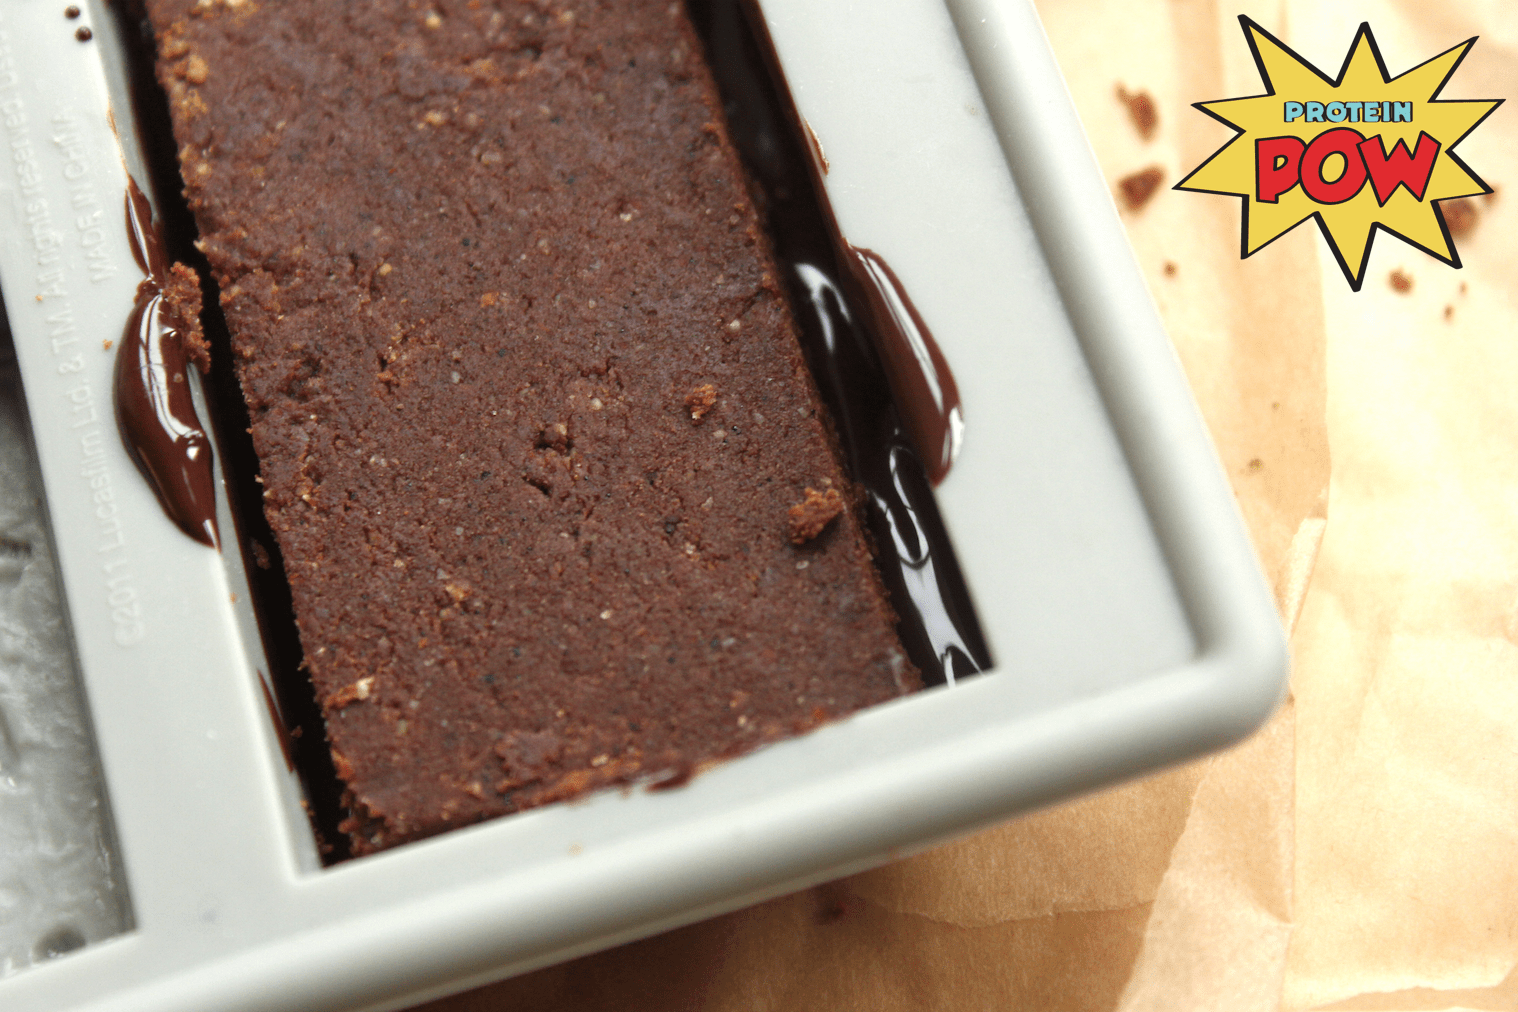 Protein Pow Protein Bars Homemade Protein Bars Protein Brownie Bar Recipes